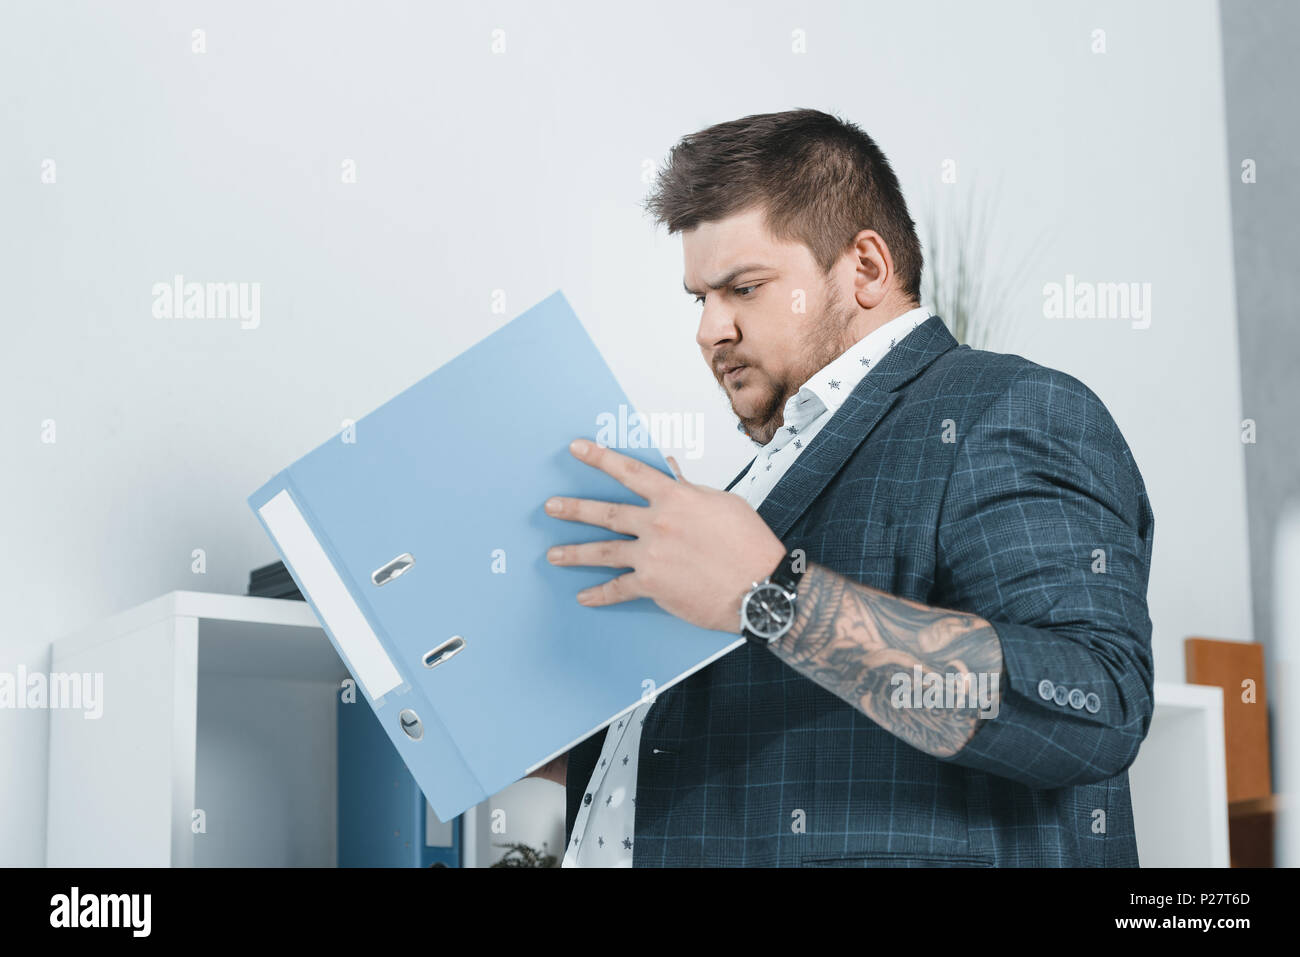 overweight businessman in suit working with documents in folders Stock Photo